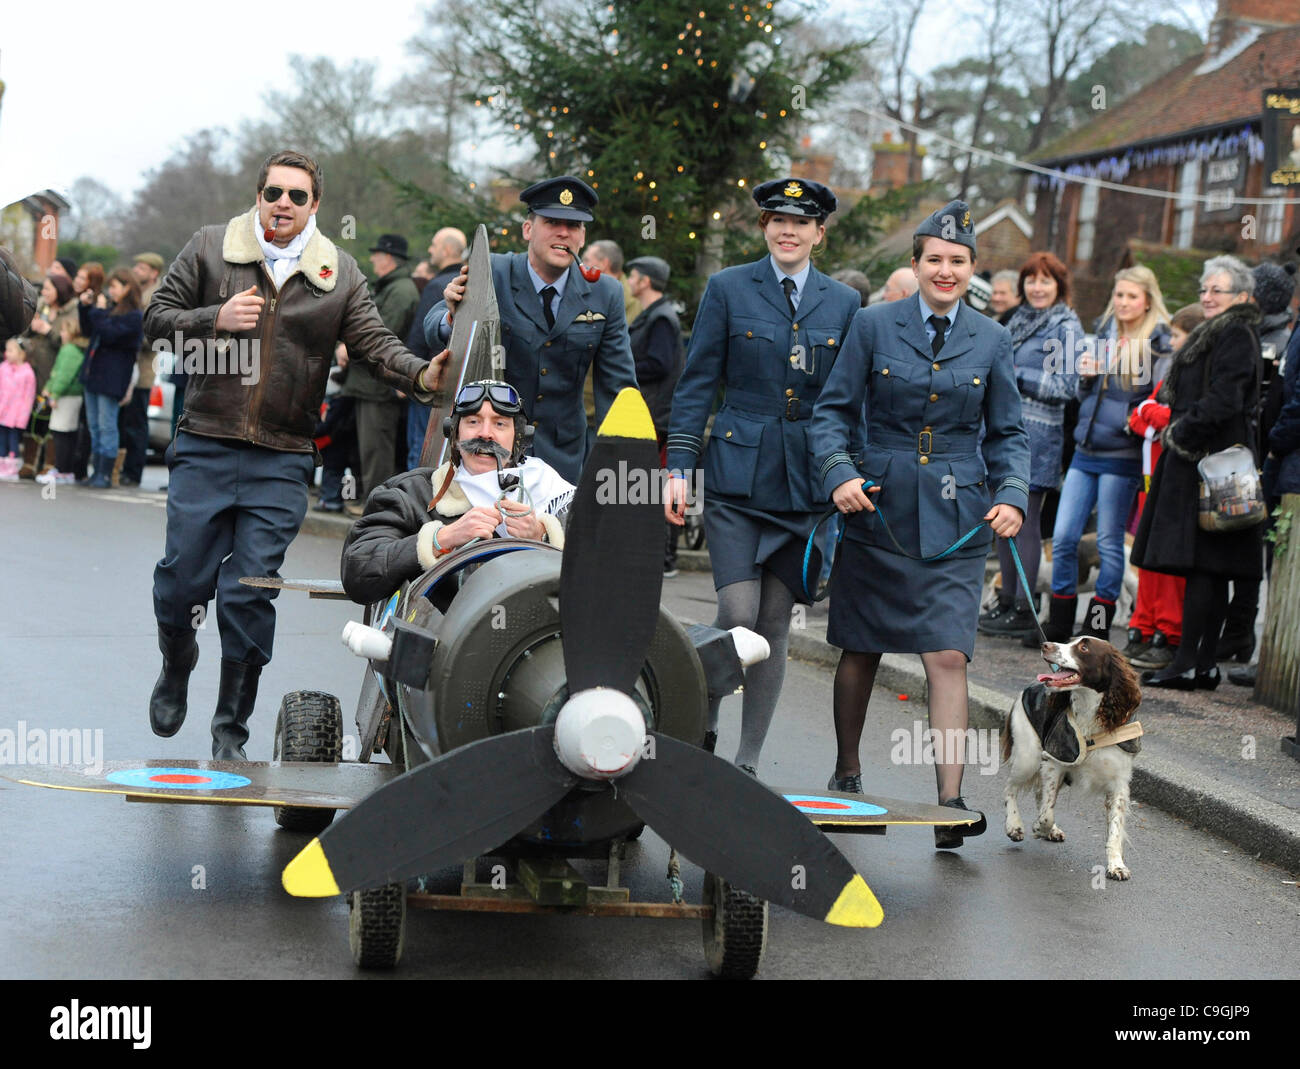 East Hoathly, East Sussex, UK. 26th Dec, 2011. Teams in fancy dress turned out in style for the Boxing Day Pram race in East Hoathly and were cheered on by large crowds. The annual event organised by the Carnival Society raises money for local charities. Credit: Jim Holden/Alamy Live News Stock Photo